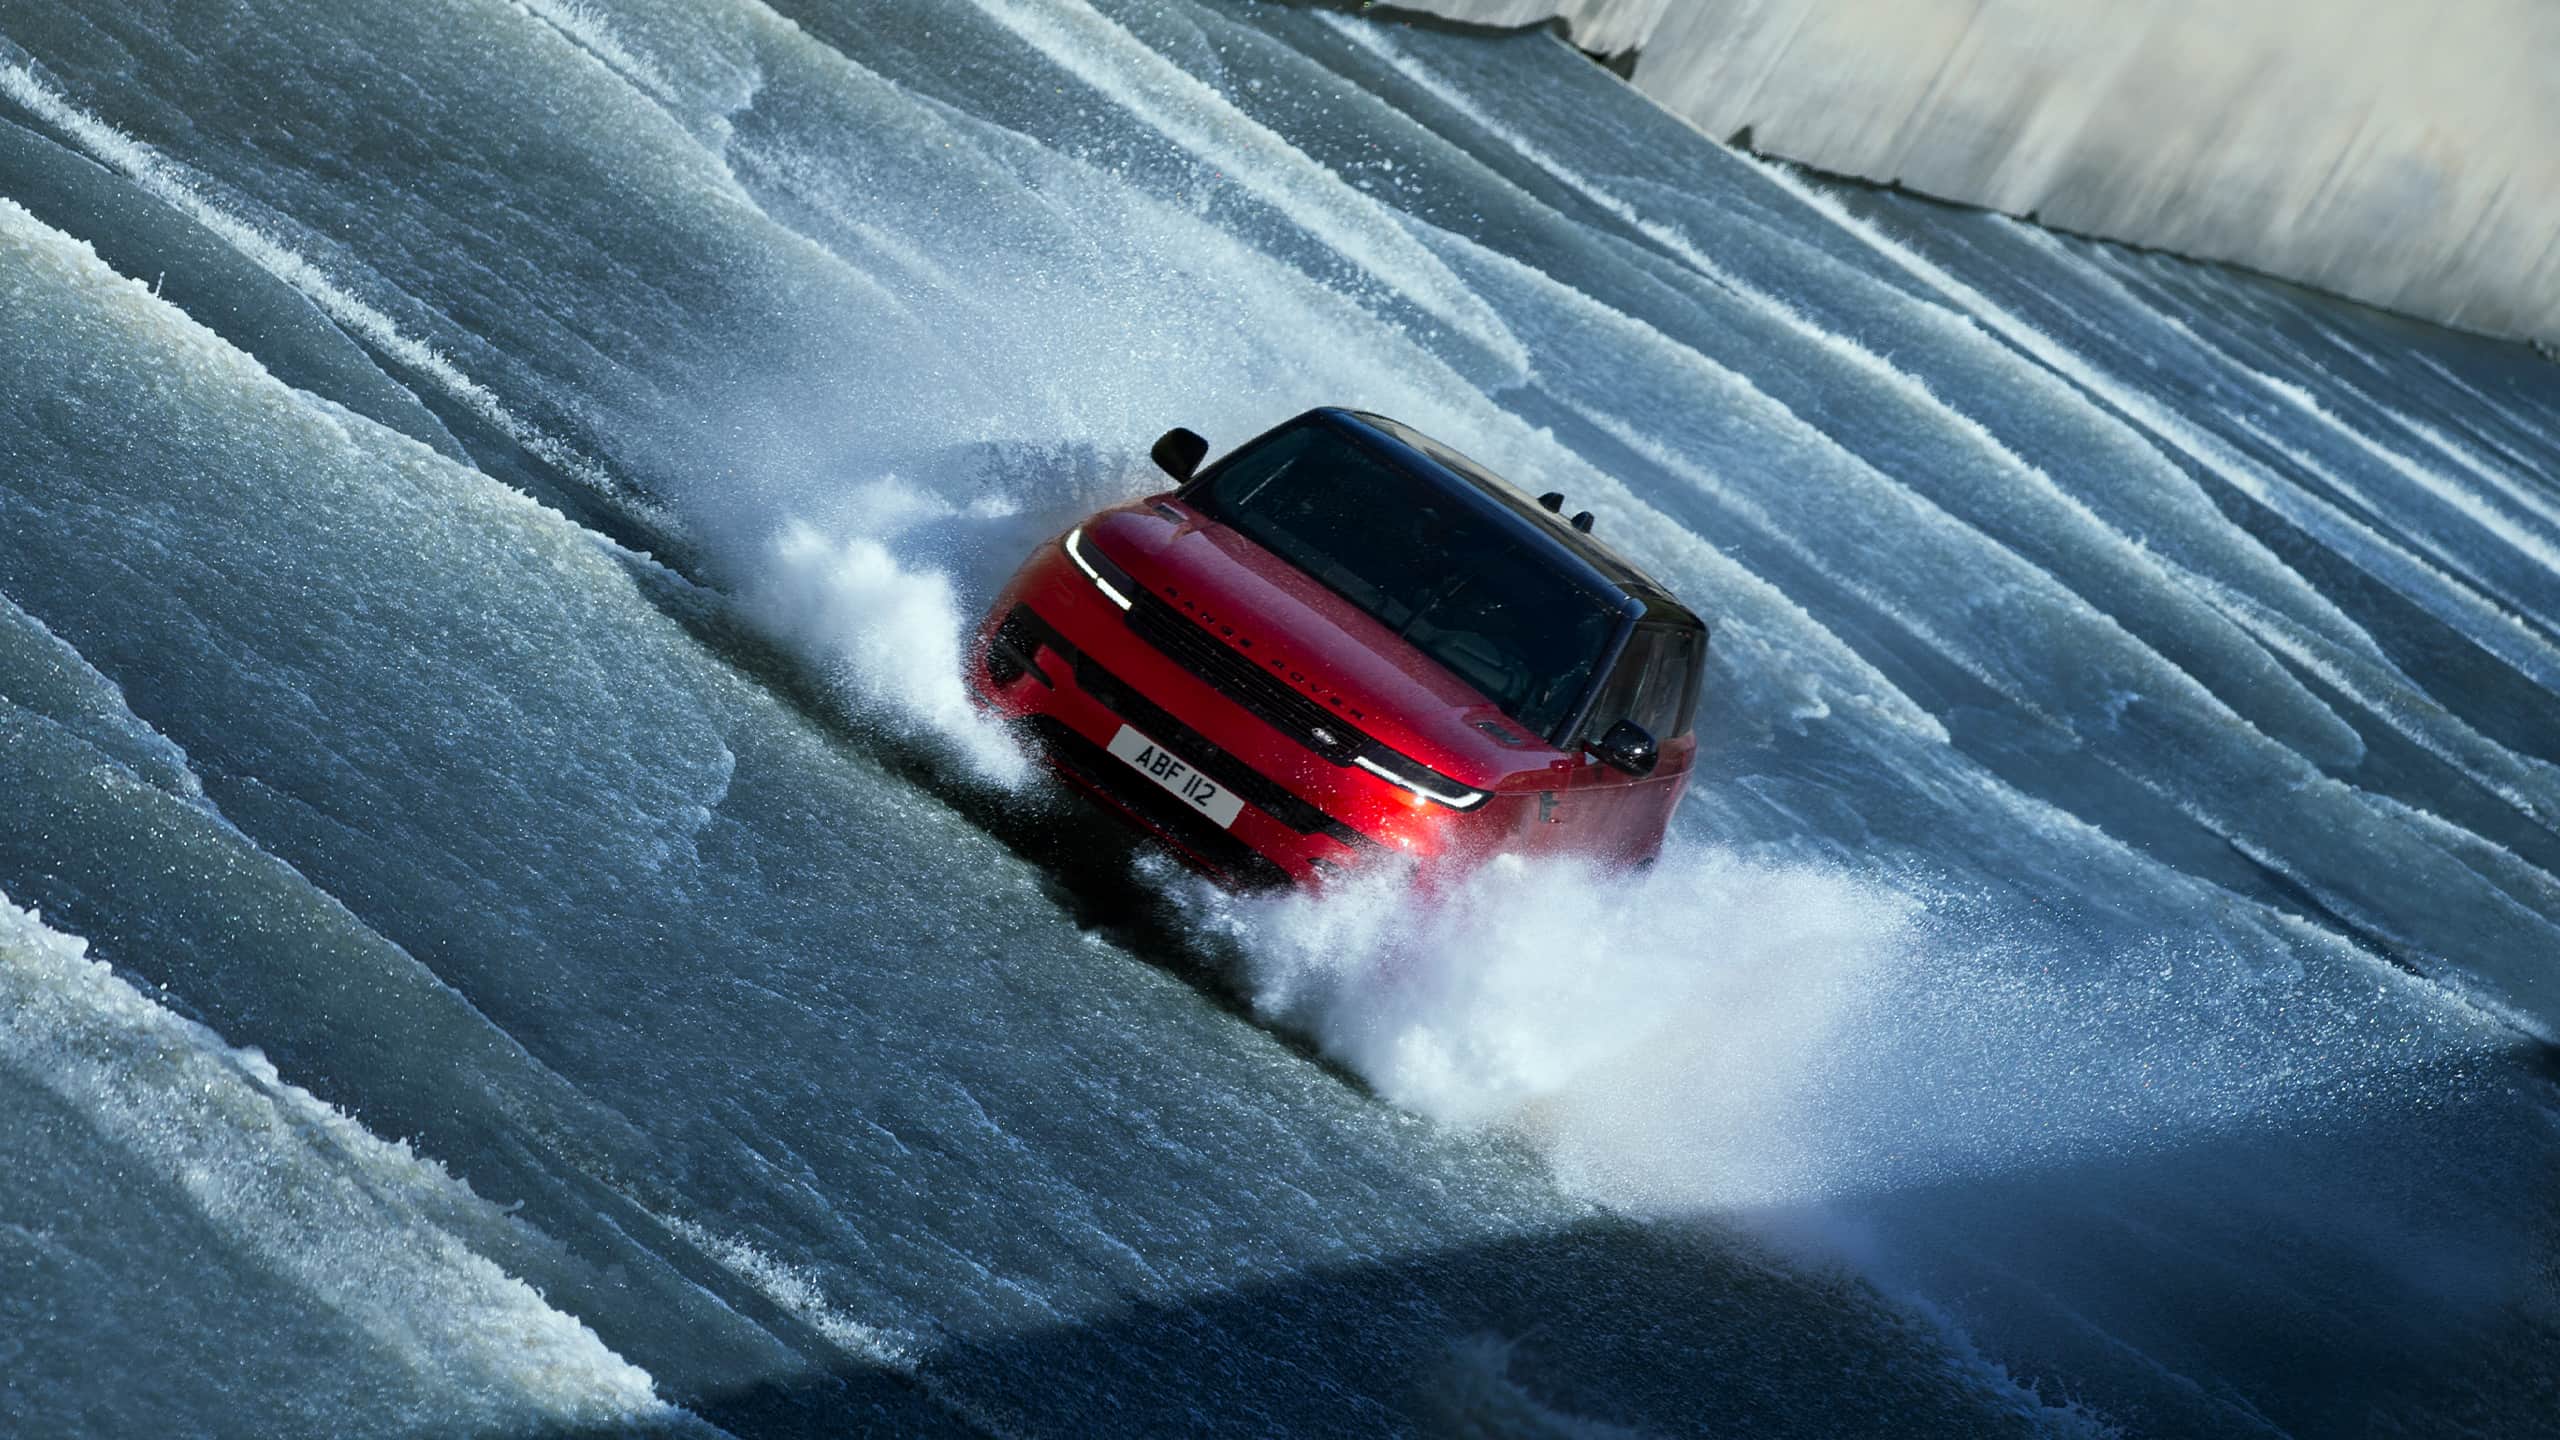 Red Range Rover sport driving through water